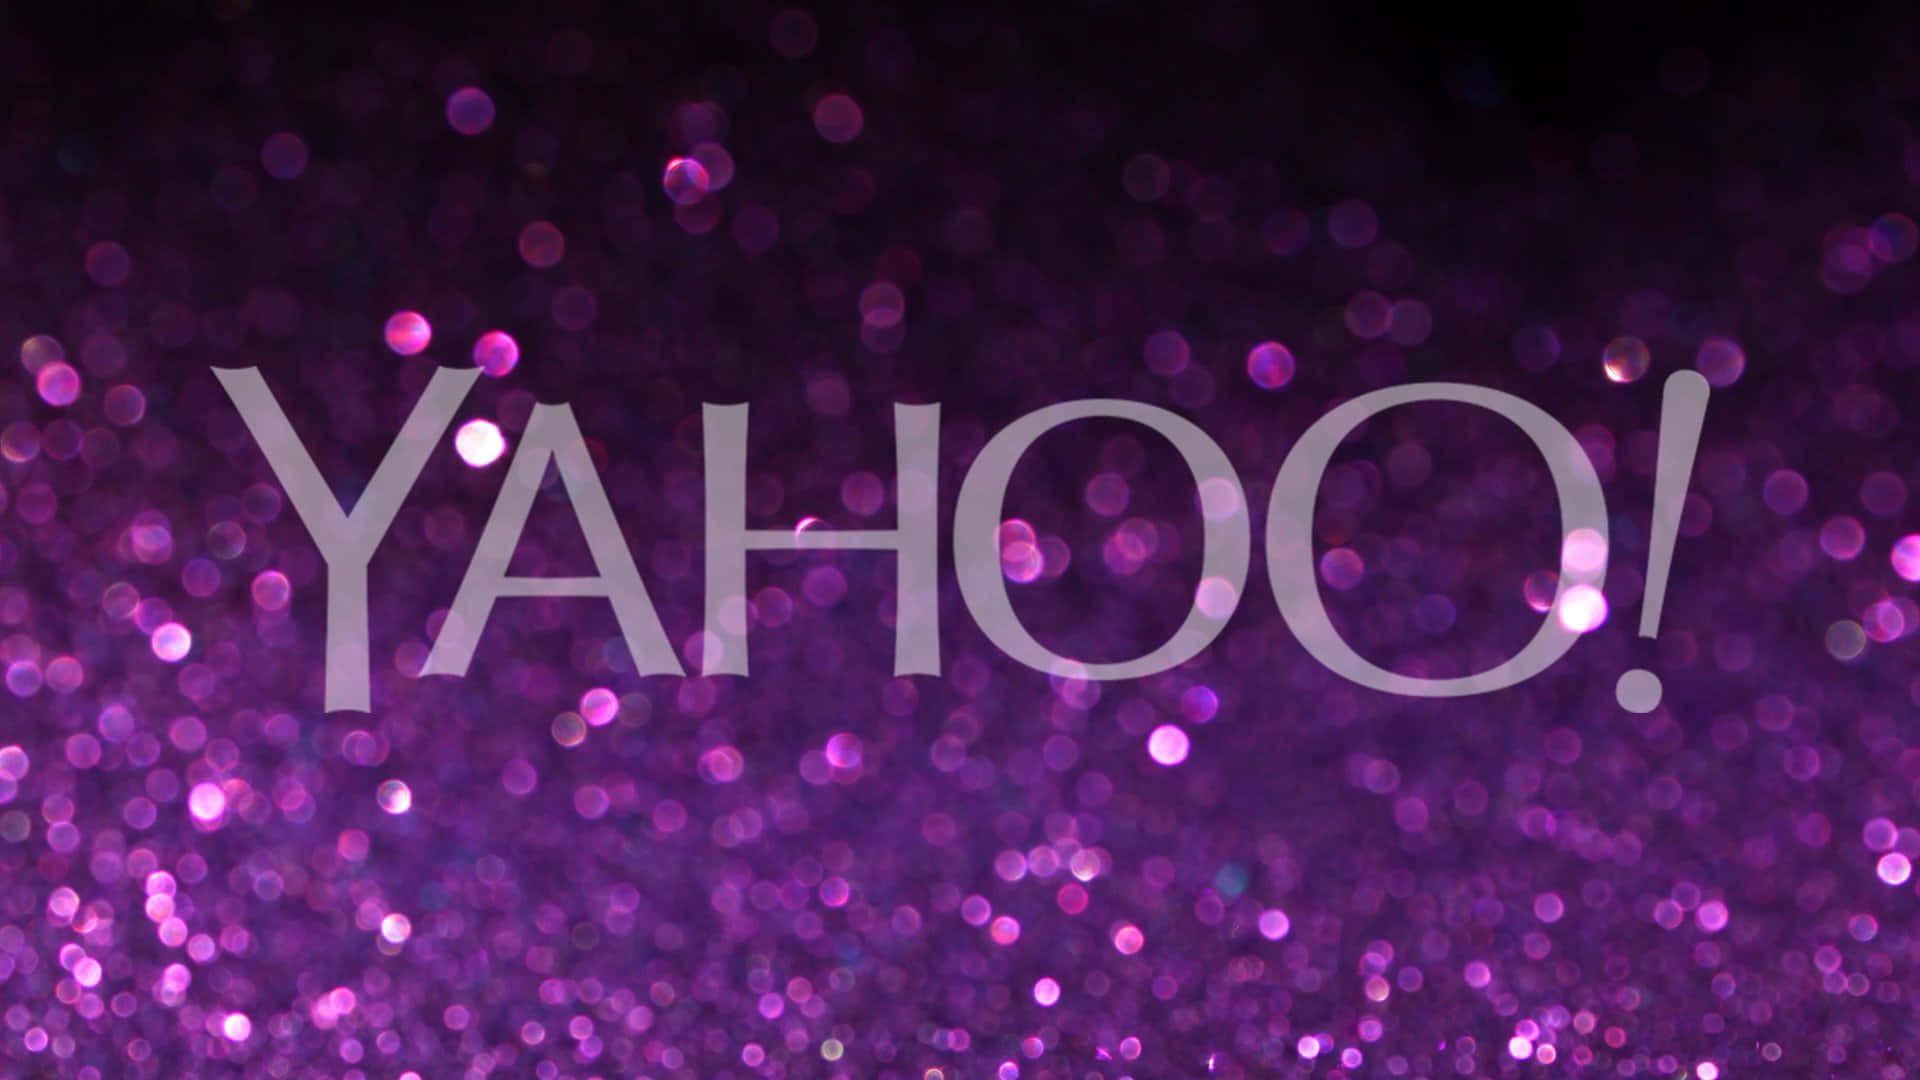 Yahoo: Home of Search, Shopping, and More